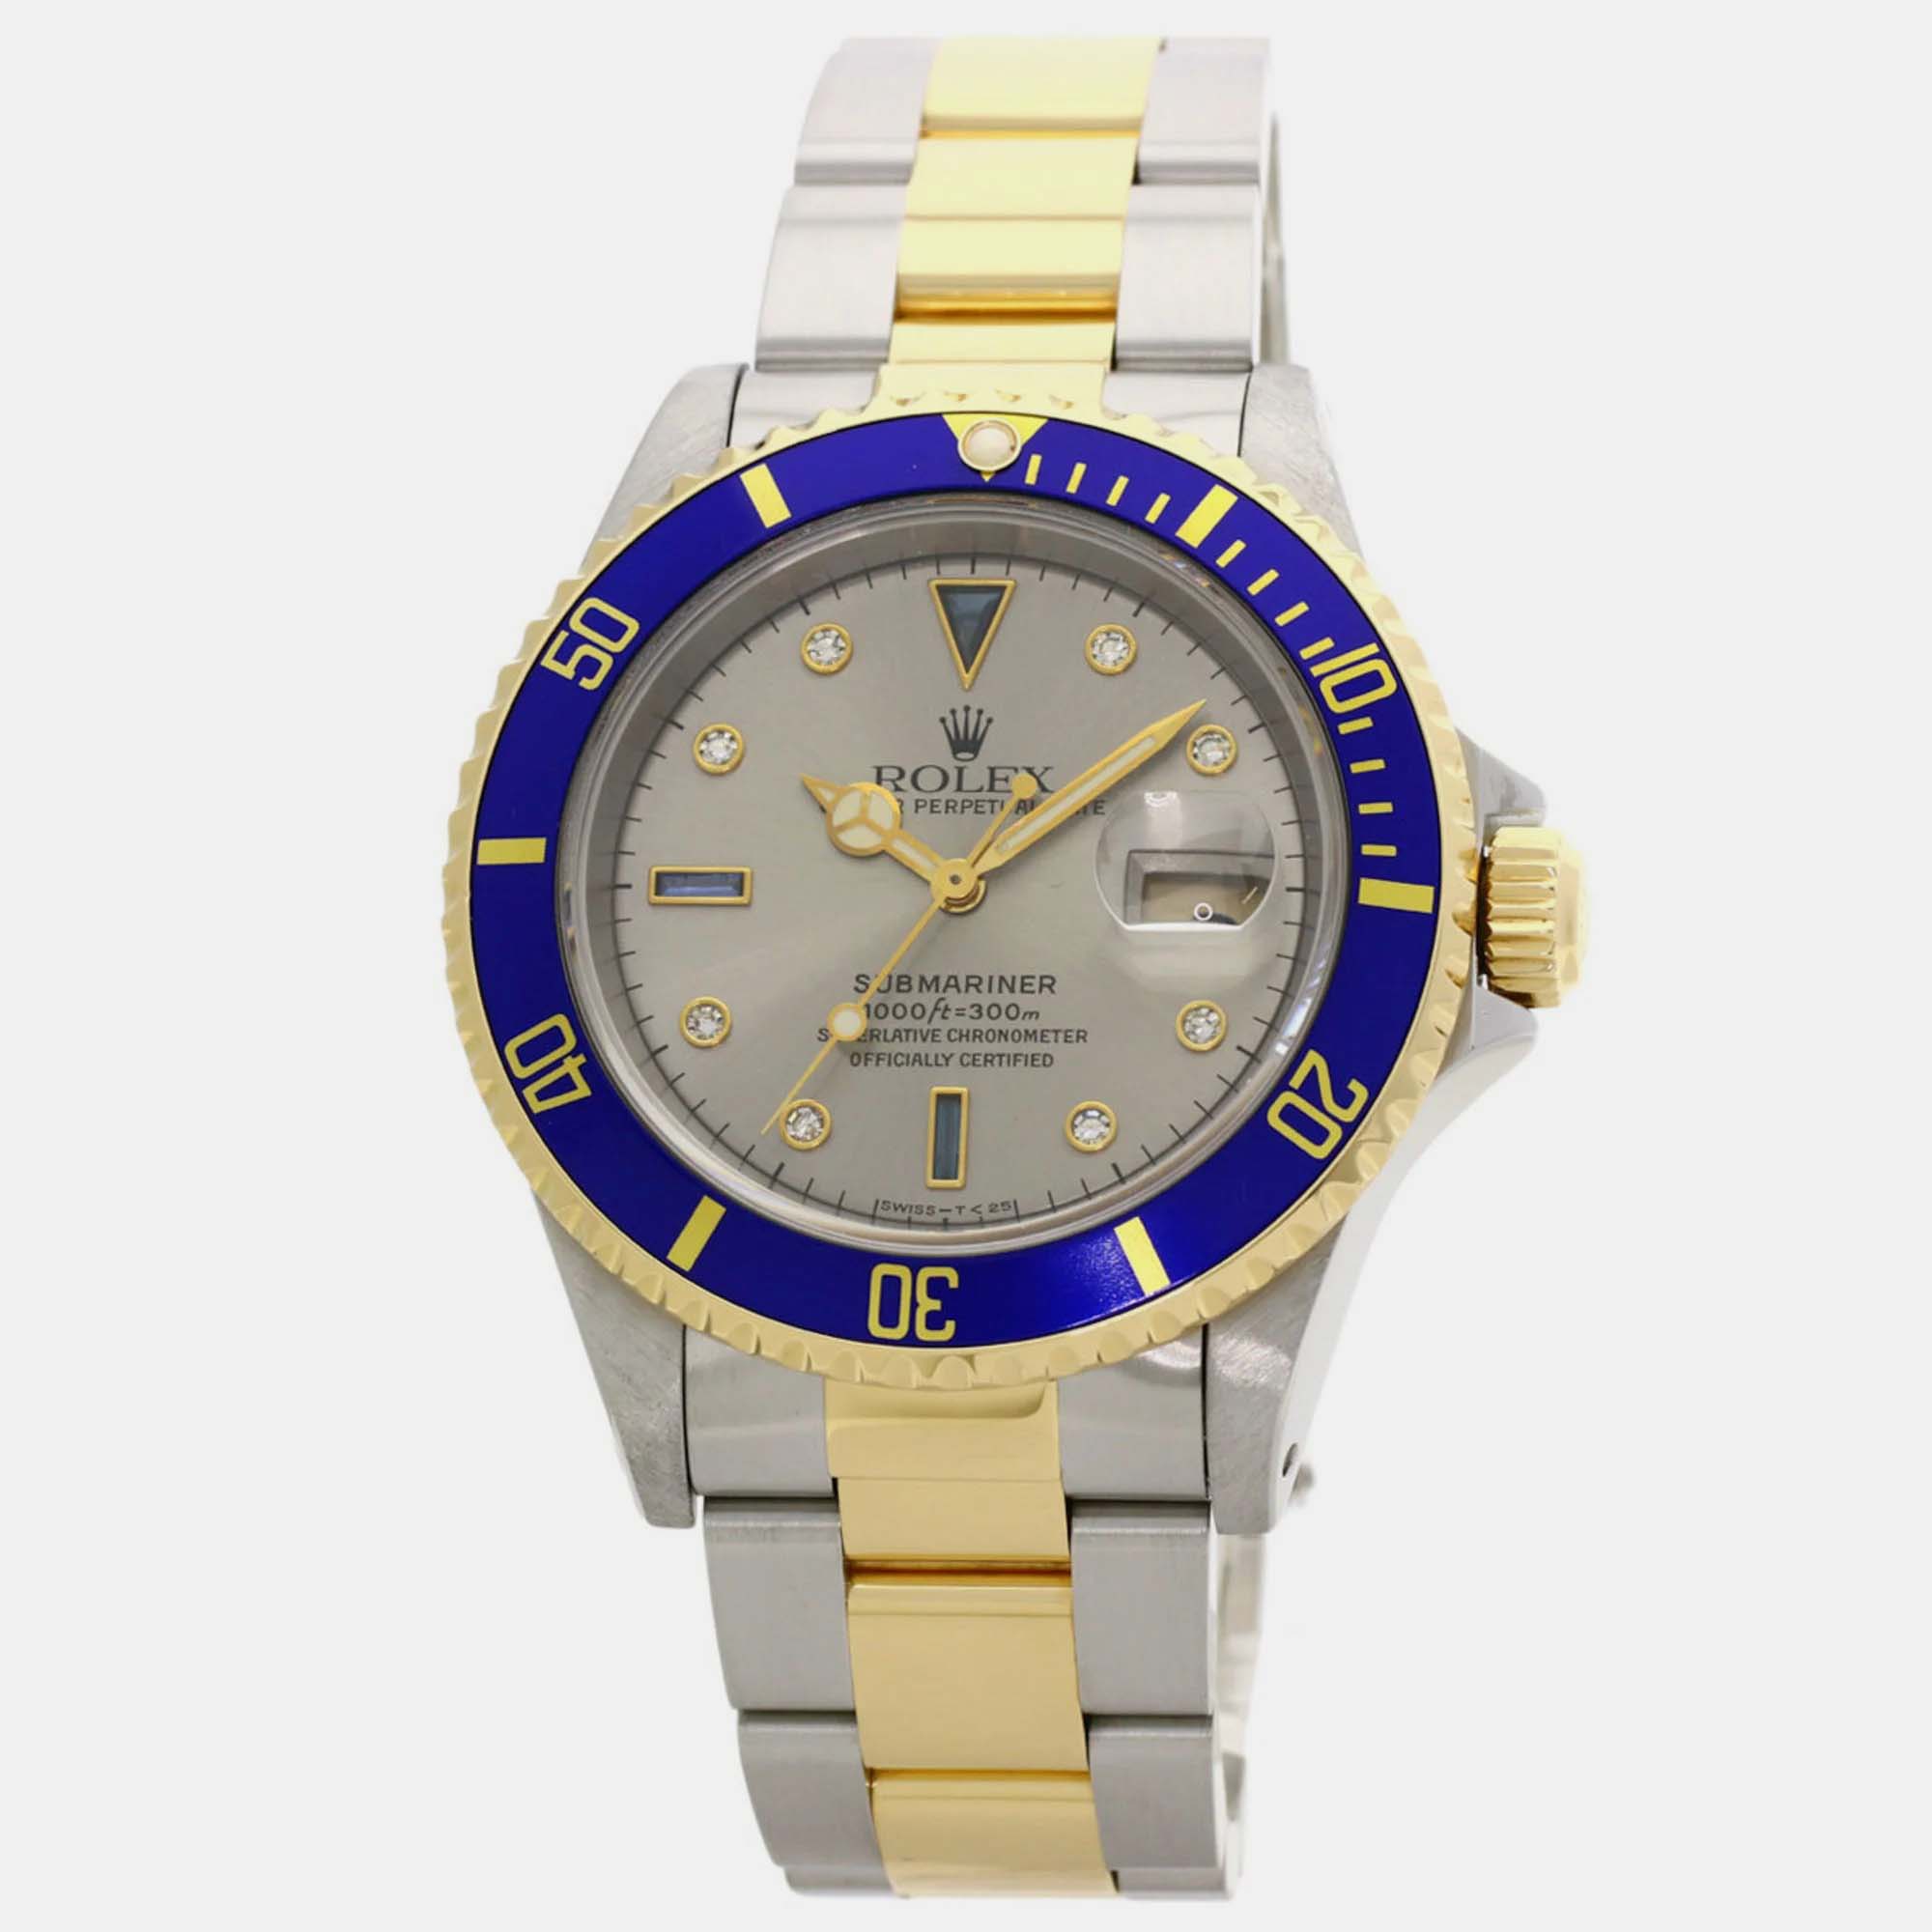 Pre-owned Rolex Silver Diamond 18k Yellow Gold And Stainless Steel Submariner 16613sg Automatic Men's Wristwatch 39